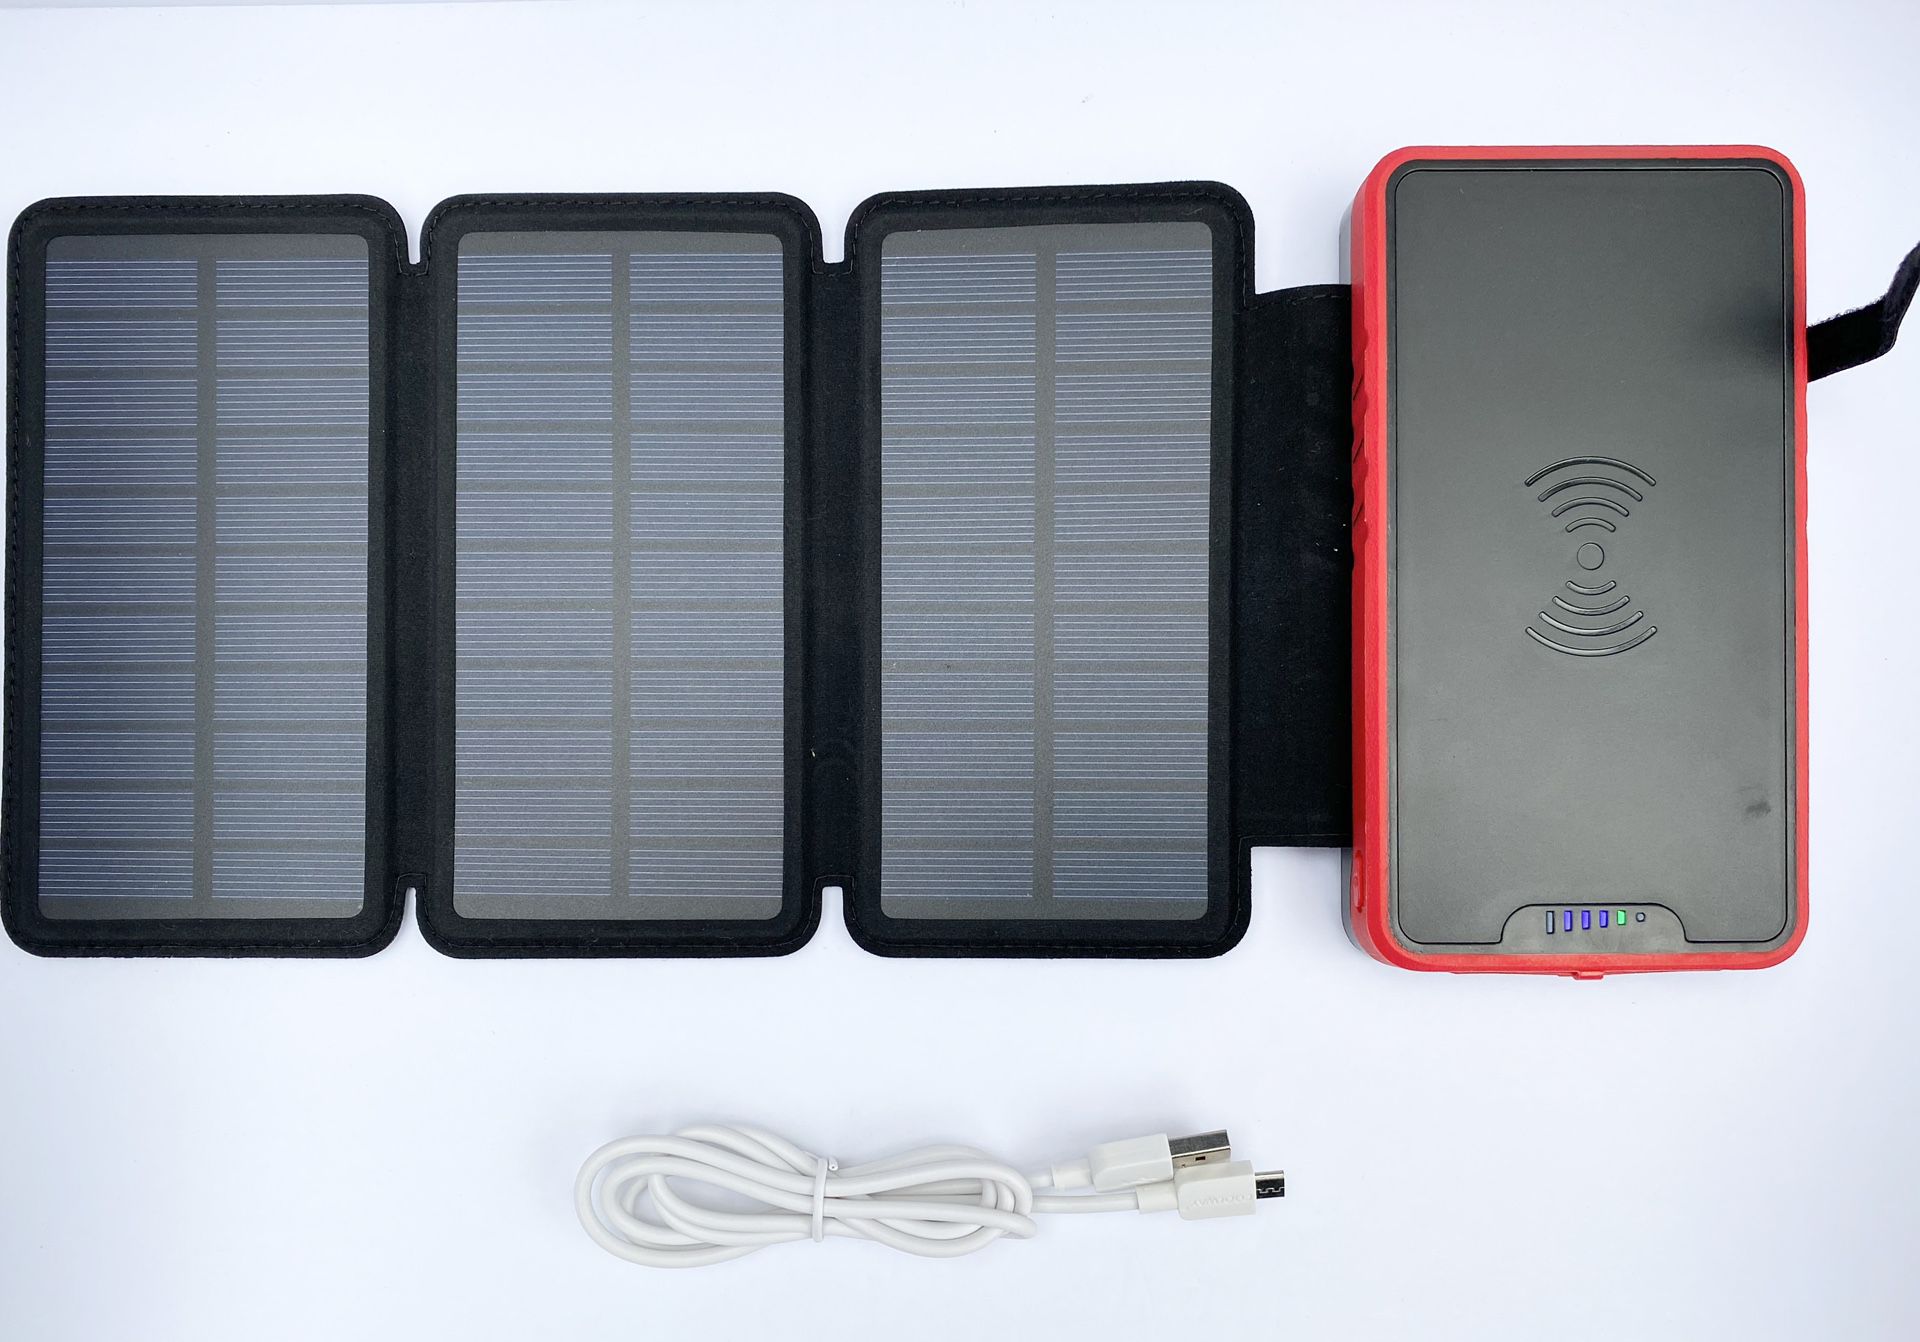 22000mAh Wireless Portable Solar Charger, External Backup Battery, 3 Output Ports, 4 LED Flashlights, Carabiner, IP54 Rainproof for Camping, Outdoor